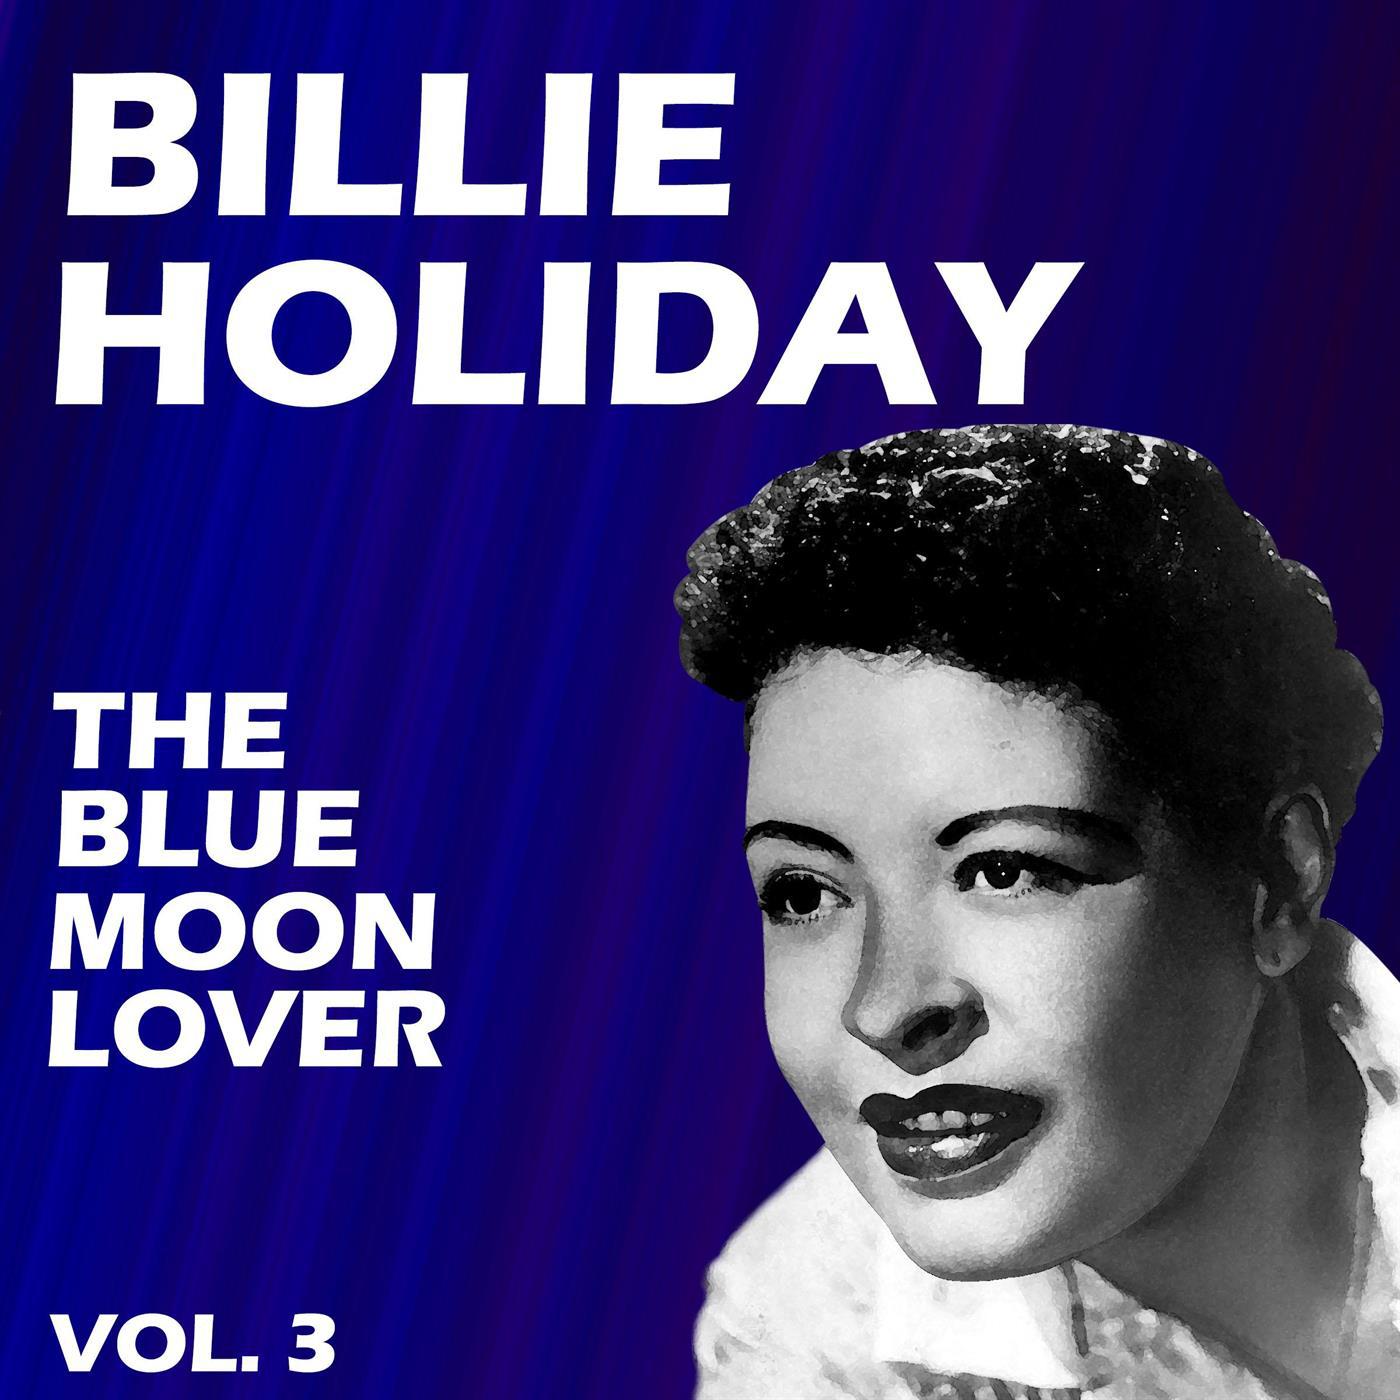 The Blue Moon Lover Vol.  3专辑